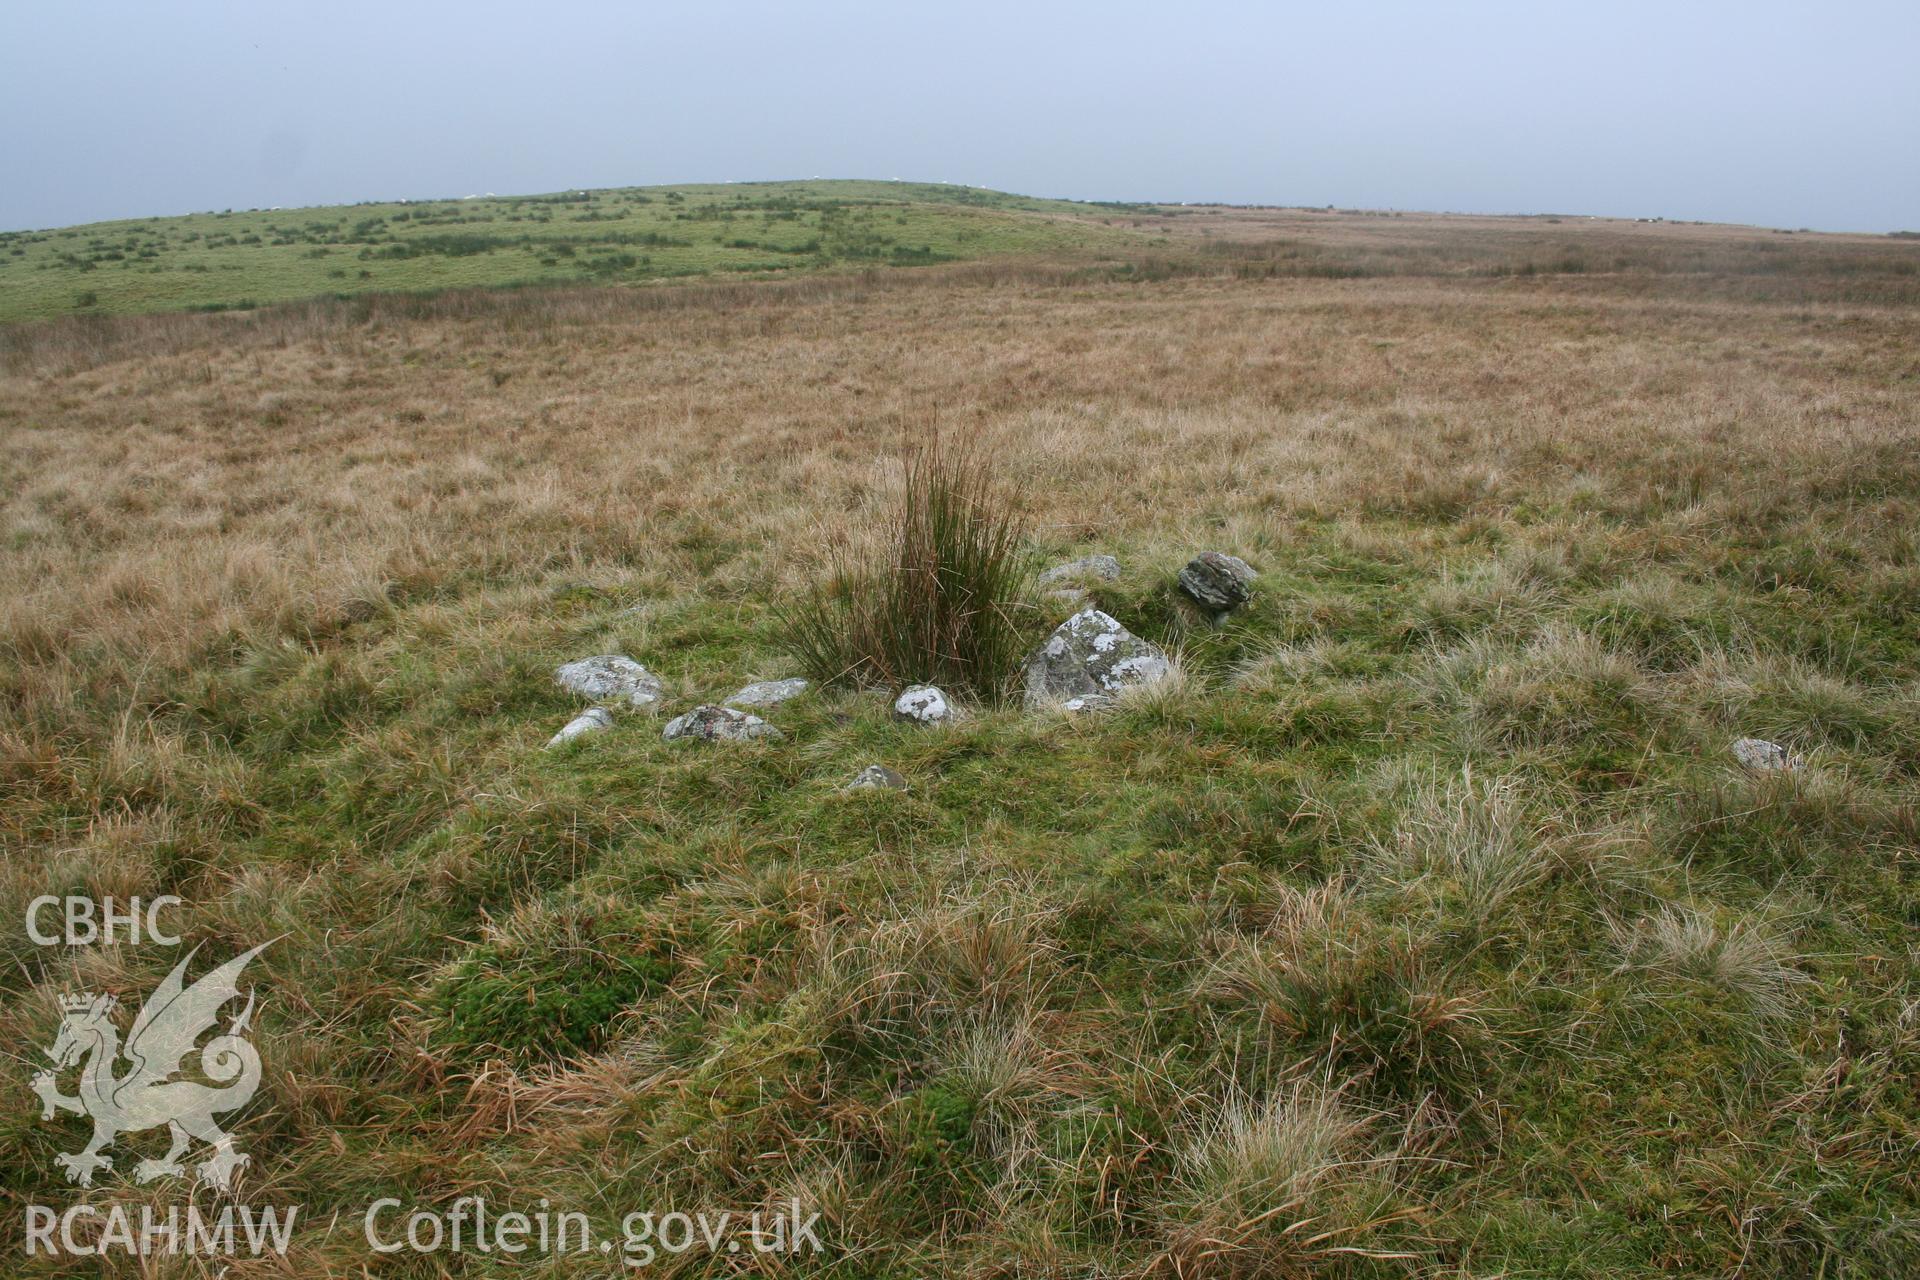 Cairn viewed from the north-west.